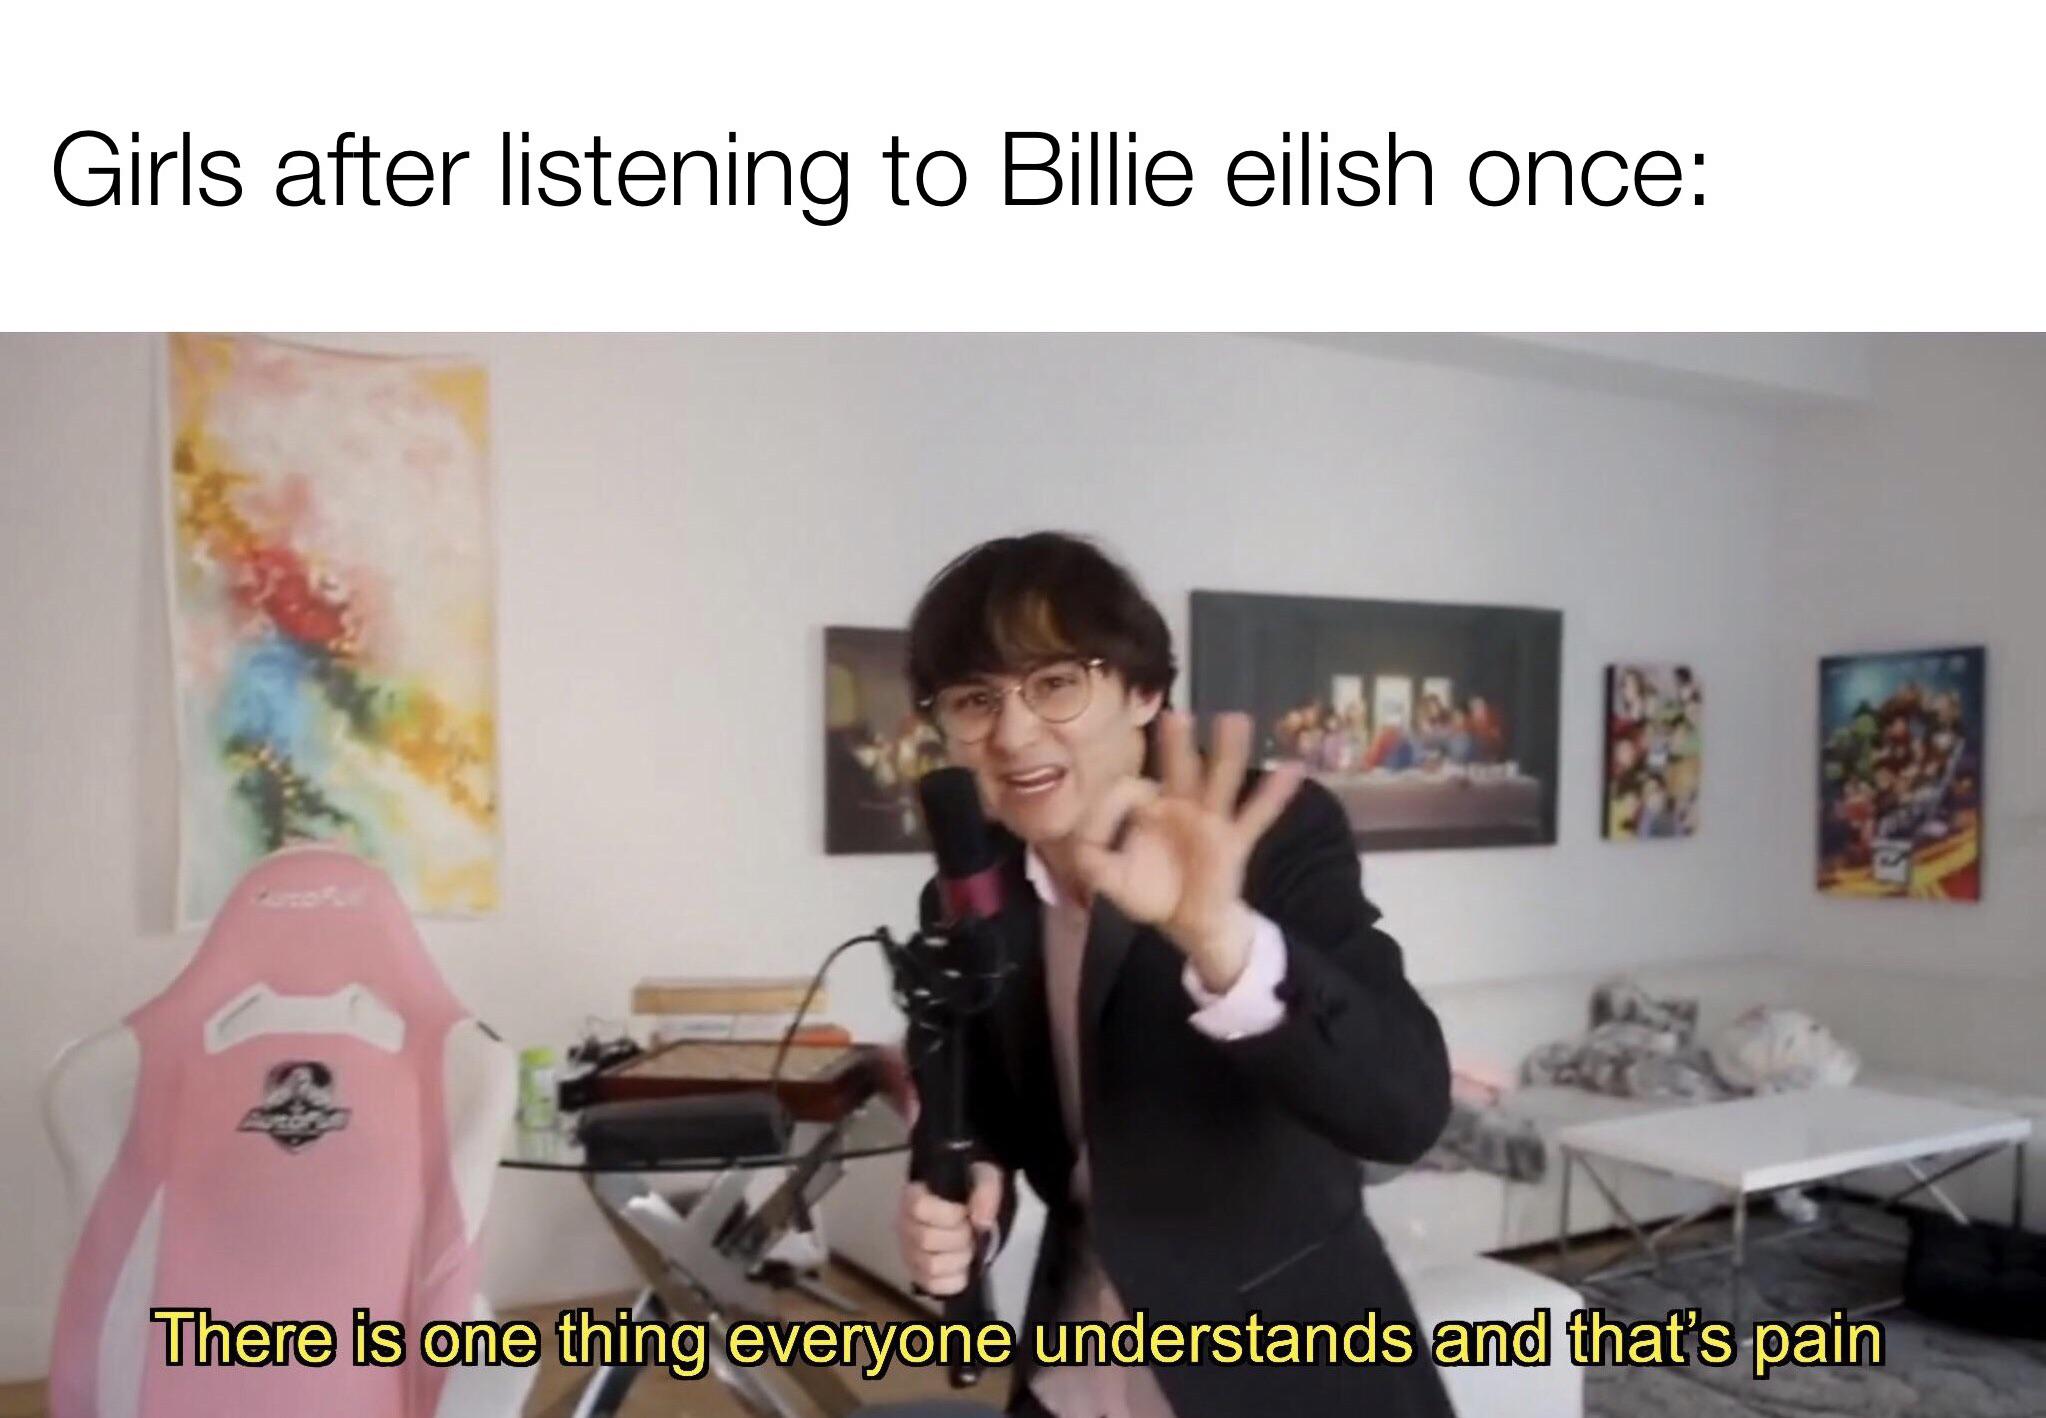 reddit dank memes 2020 - presentation -  Girls after listening to Billie eilish once There is one thing everyone understands and that's pain